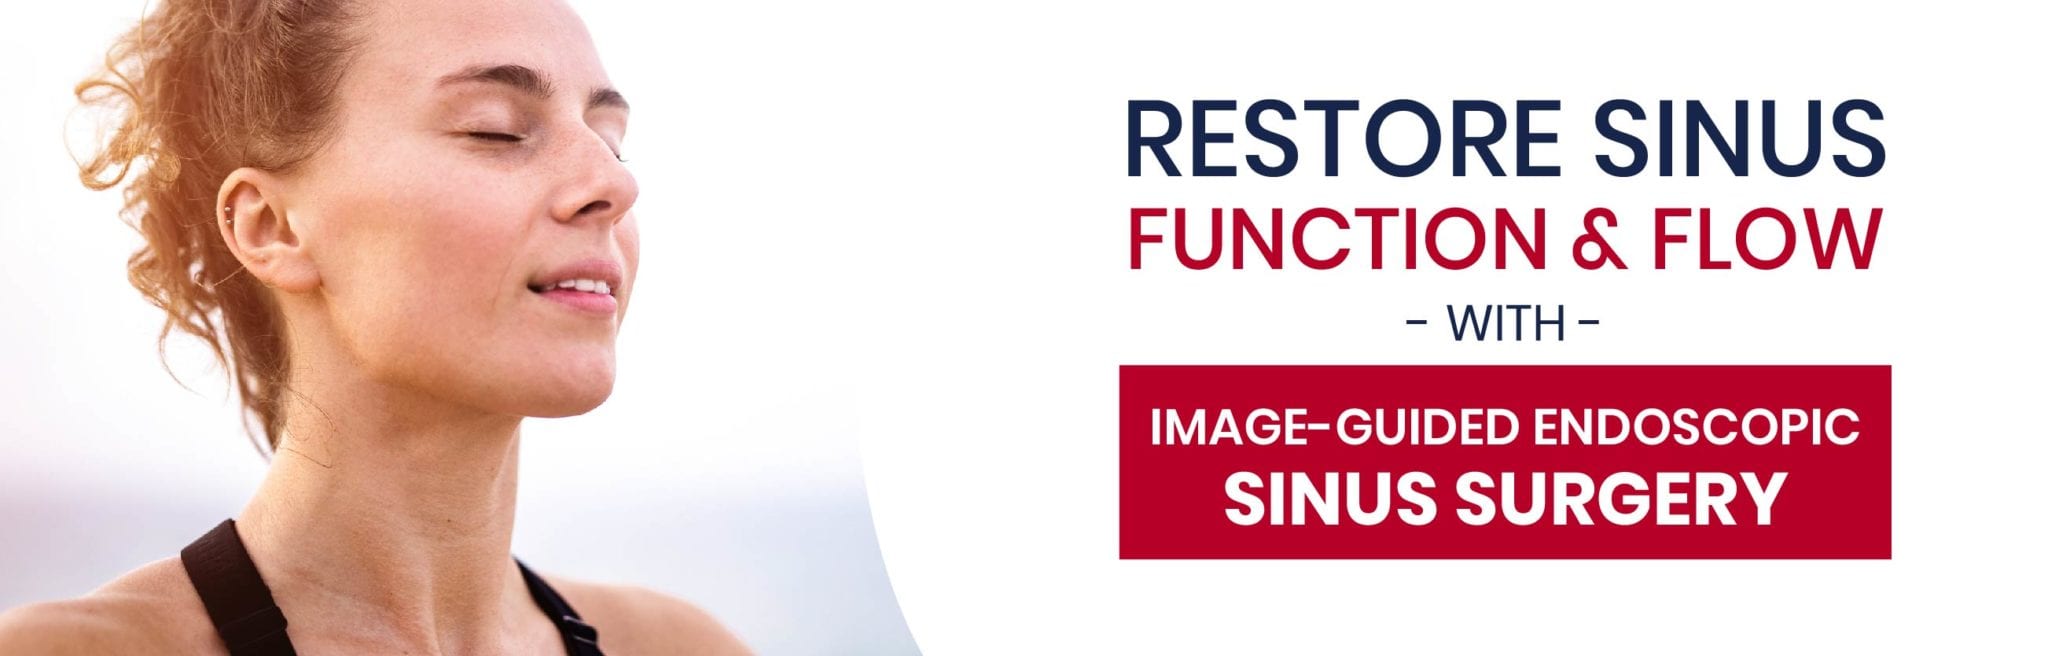 Image Guided Endoscopic Sinus Surgery Specialists